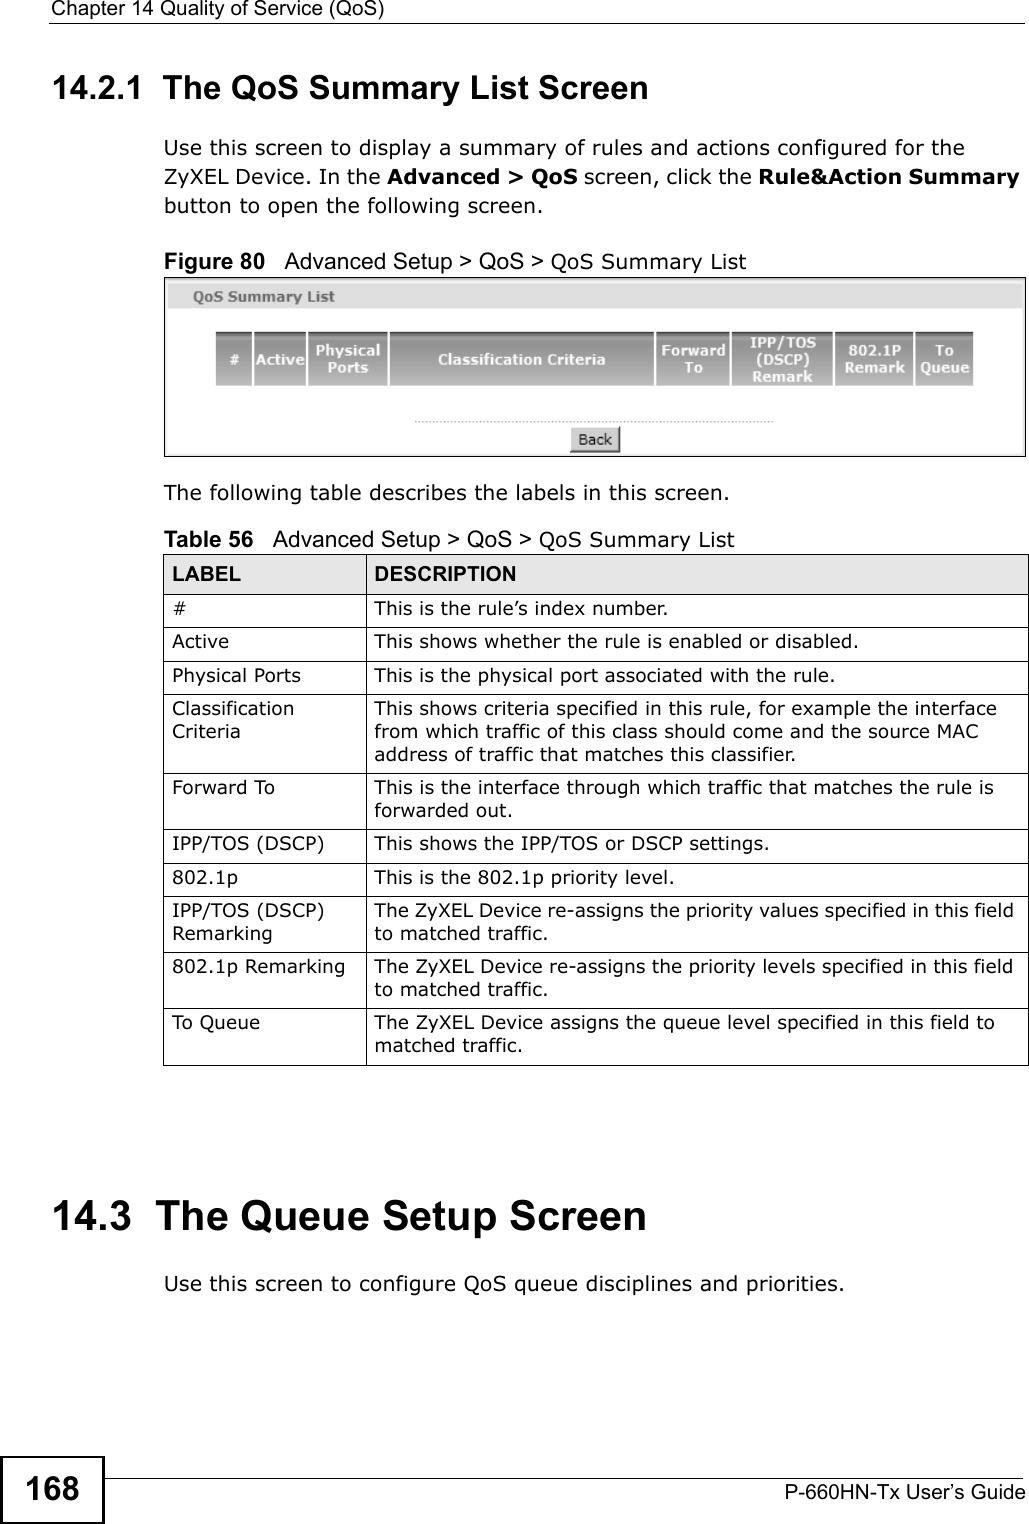 Chapter 14 Quality of Service (QoS)P-660HN-Tx User’s Guide16814.2.1  The QoS Summary List Screen Use this screen to display a summary of rules and actions configured for the ZyXEL Device. In the Advanced &gt; QoS screen, click the Rule&amp;Action Summary button to open the following screen.Figure 80   Advanced Setup &gt; QoS &gt; QoS Summary ListThe following table describes the labels in this screen.  14.3  The Queue Setup ScreenUse this screen to configure QoS queue disciplines and priorities.Table 56   Advanced Setup &gt; QoS &gt; QoS Summary ListLABEL DESCRIPTION#This is the rule’s index number.Active This shows whether the rule is enabled or disabled.Physical Ports This is the physical port associated with the rule.Classification CriteriaThis shows criteria specified in this rule, for example the interface from which traffic of this class should come and the source MAC address of traffic that matches this classifier.Forward To This is the interface through which traffic that matches the rule is forwarded out.IPP/TOS (DSCP) This shows the IPP/TOS or DSCP settings.802.1p This is the 802.1p priority level.IPP/TOS (DSCP) RemarkingThe ZyXEL Device re-assigns the priority values specified in this field to matched traffic.802.1p Remarking The ZyXEL Device re-assigns the priority levels specified in this field to matched traffic.To Queue The ZyXEL Device assigns the queue level specified in this field to matched traffic.